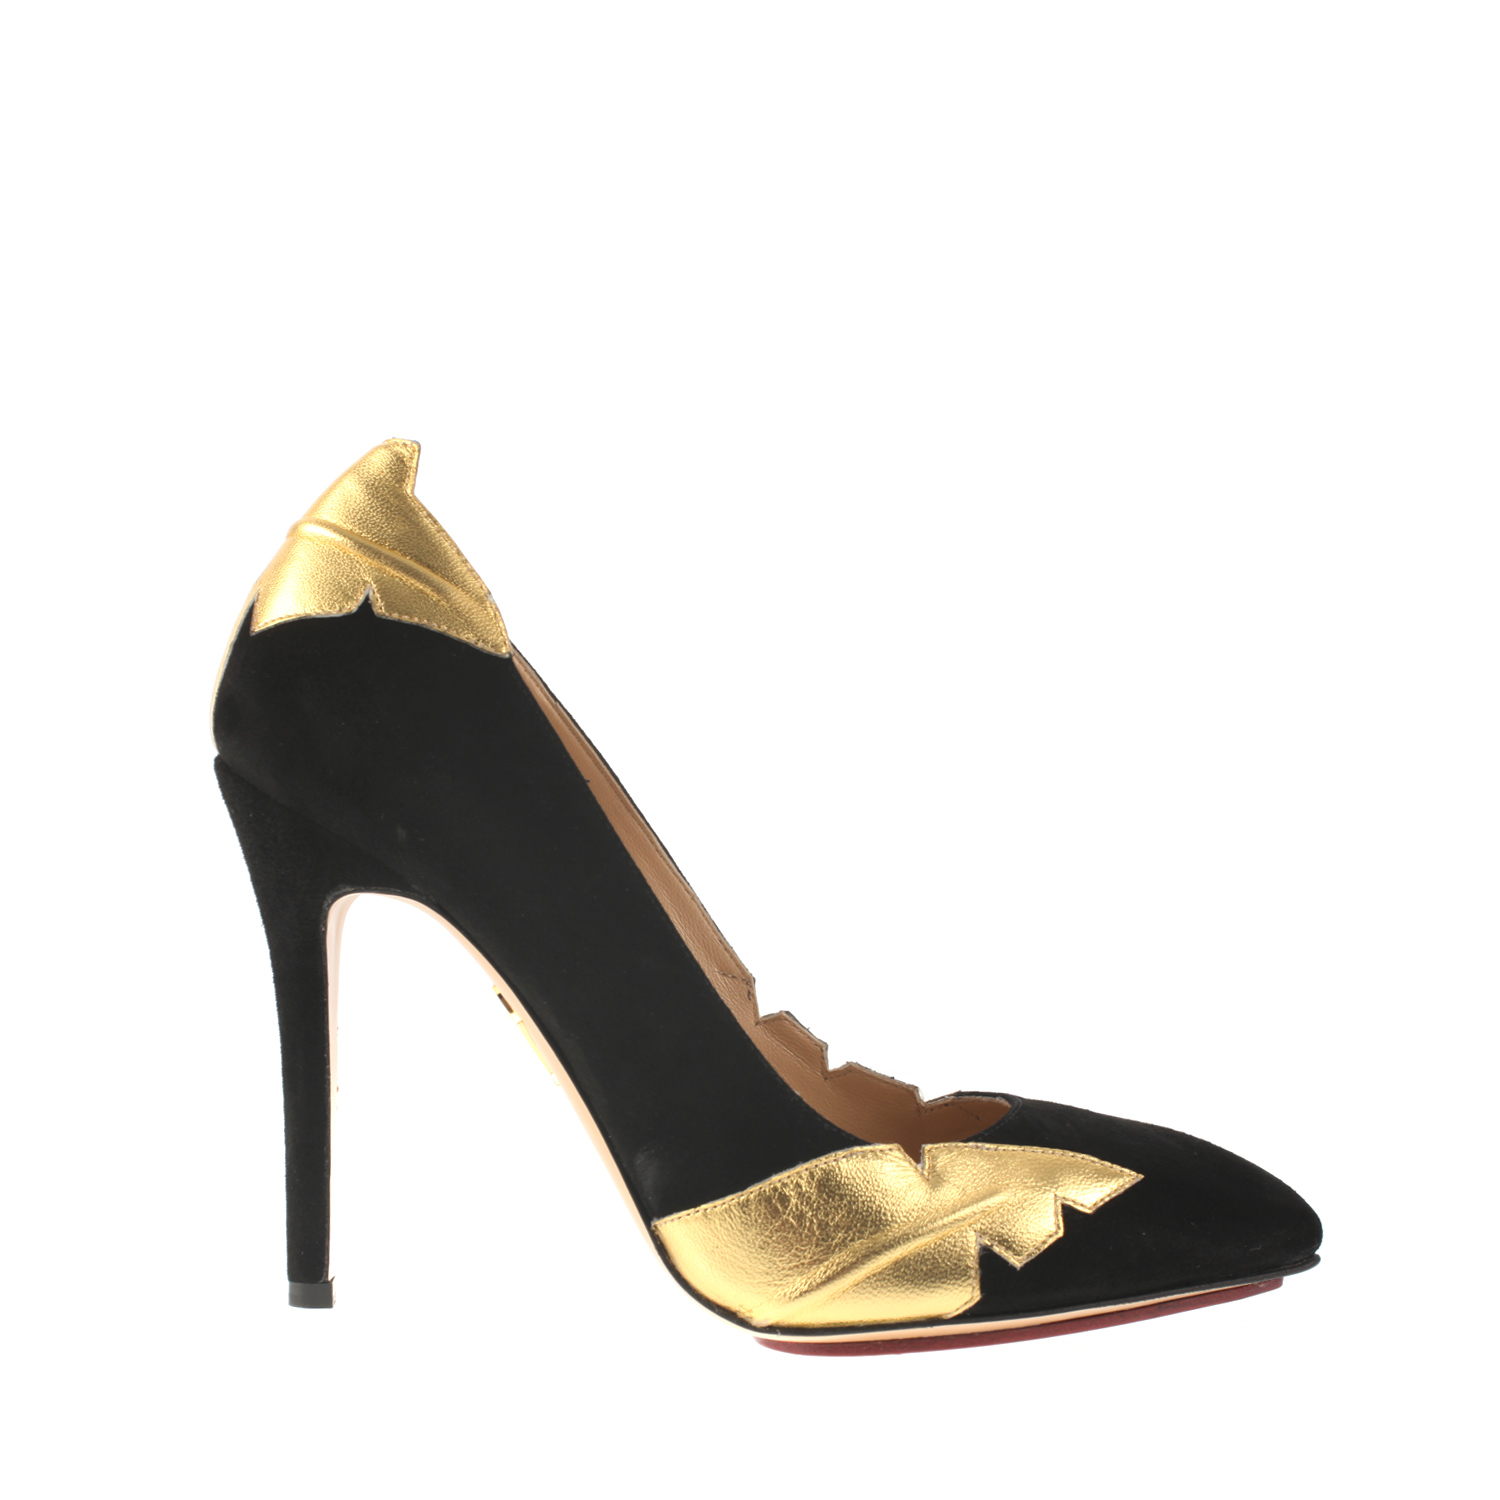 Charlotte Olympia Black Velvet Calf and Gold Leather Ocean Drive ...